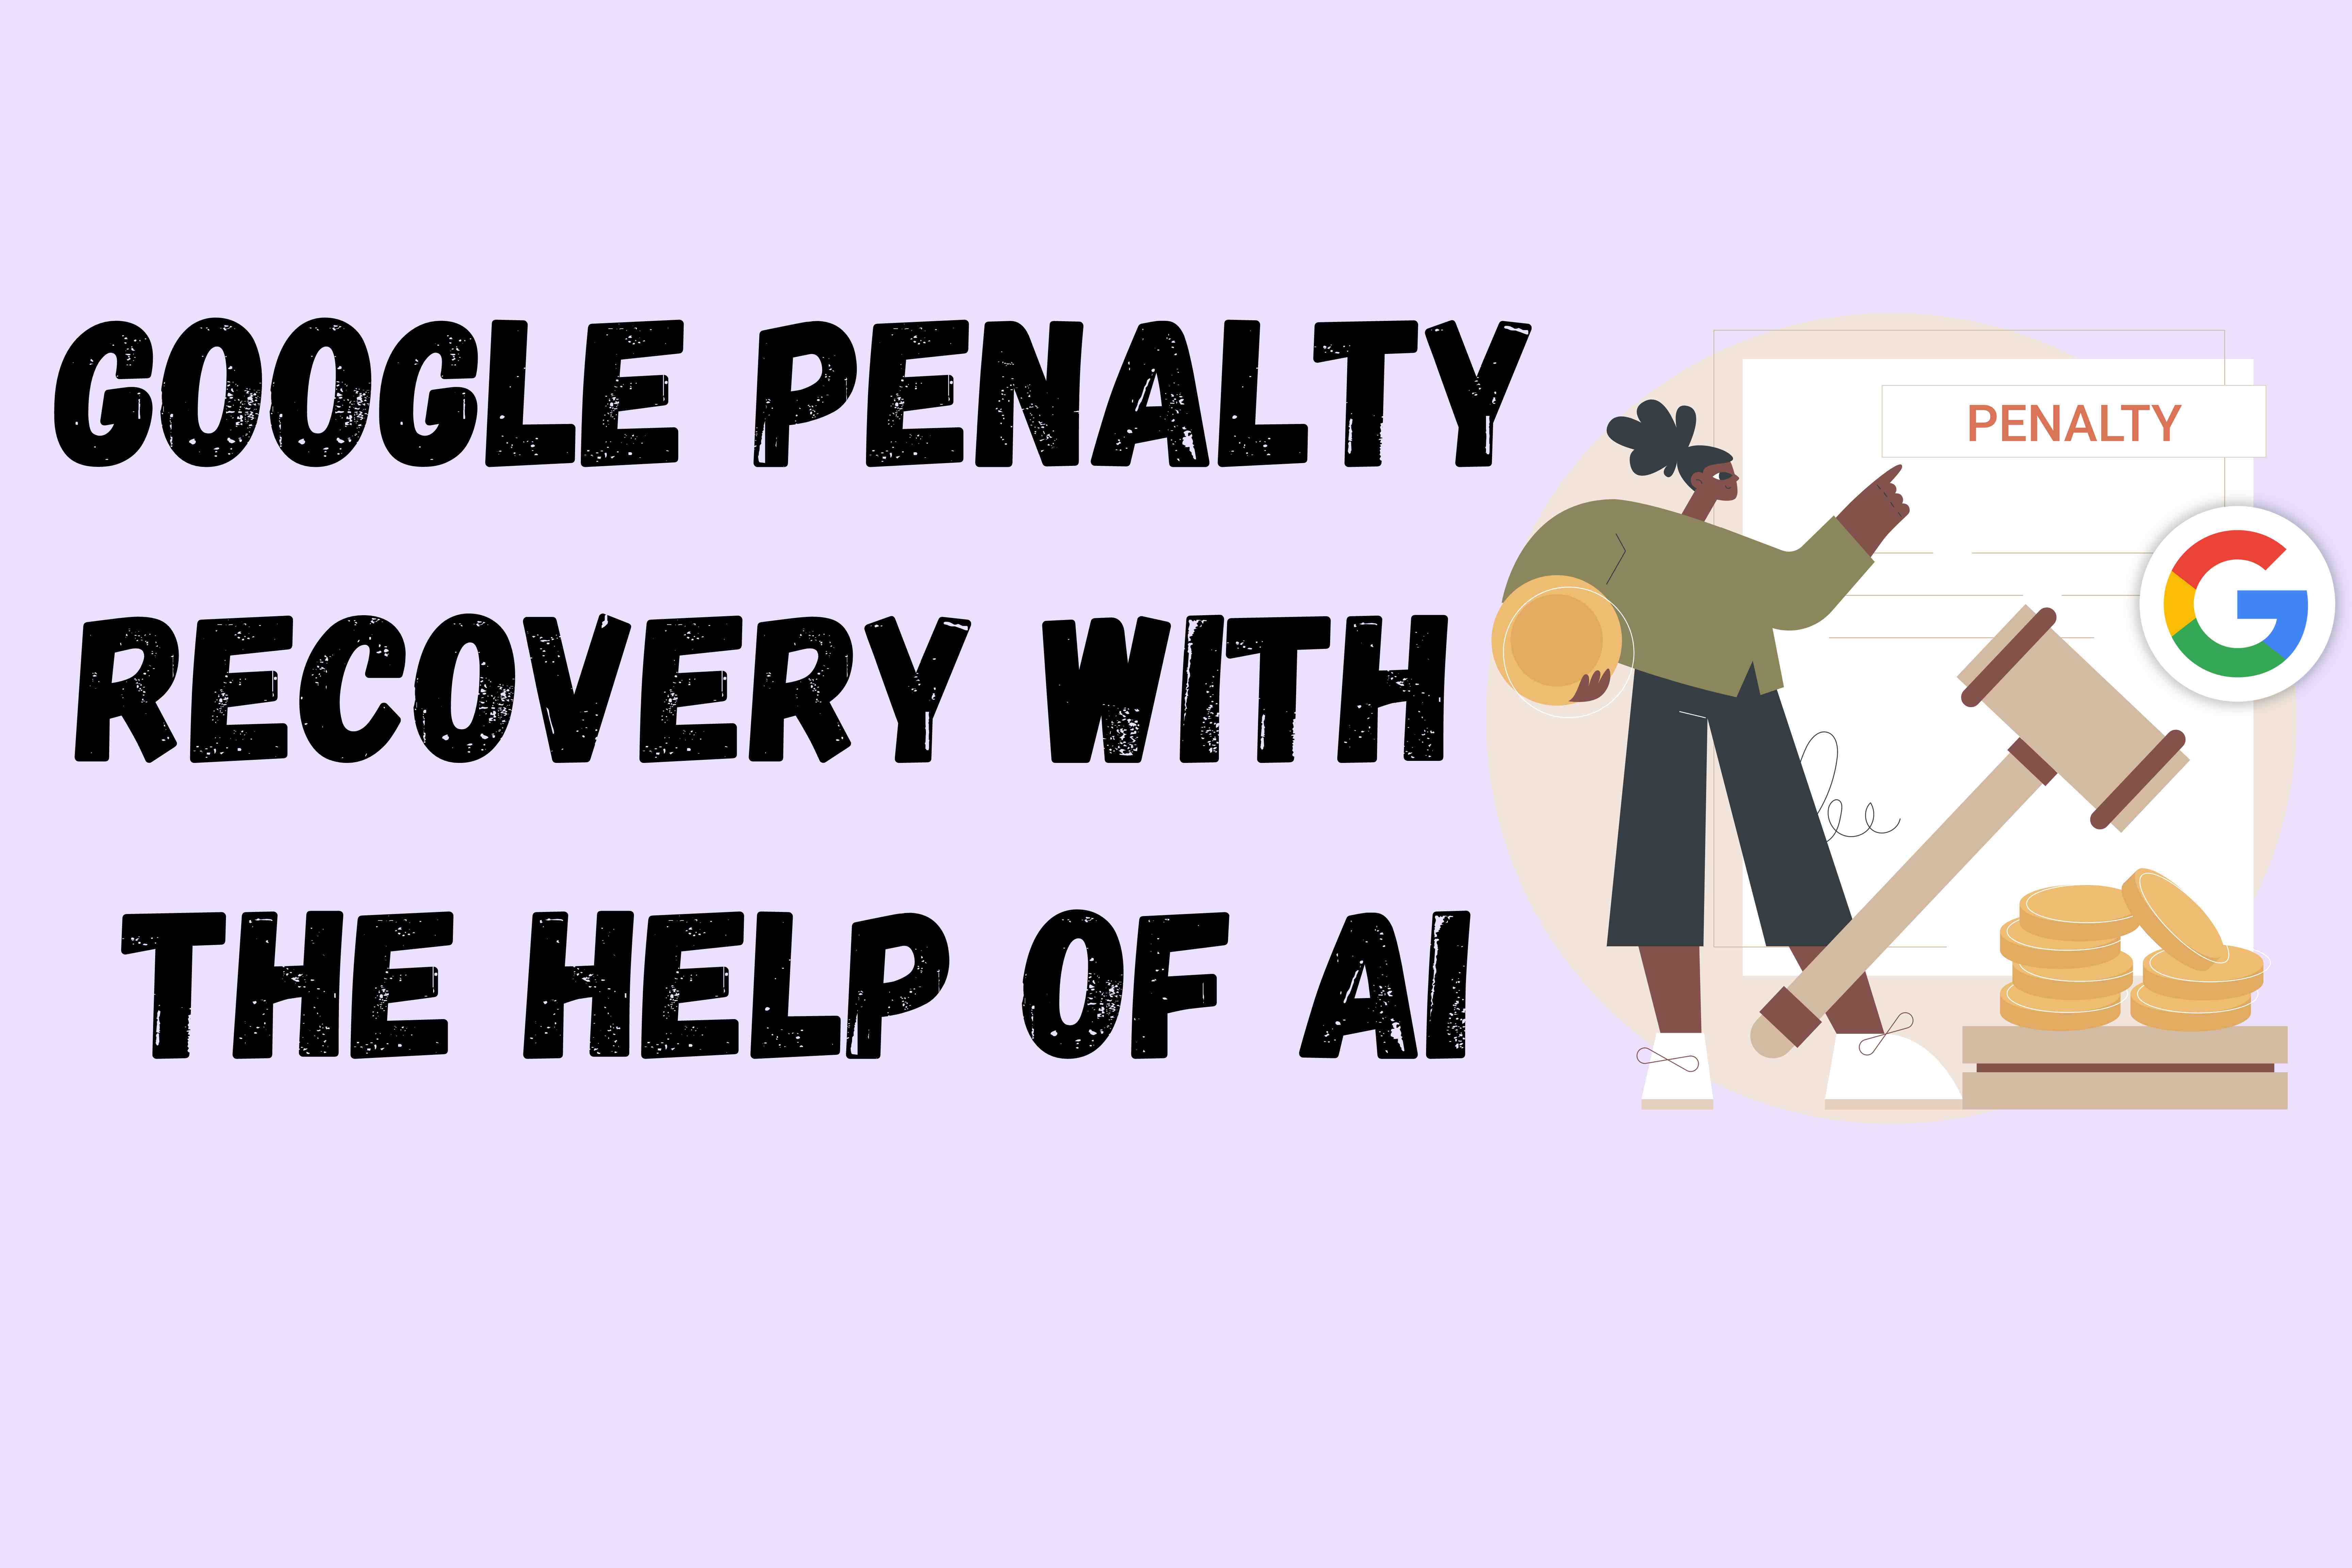 GOOGLE PENALTY RECOVERY USING AI